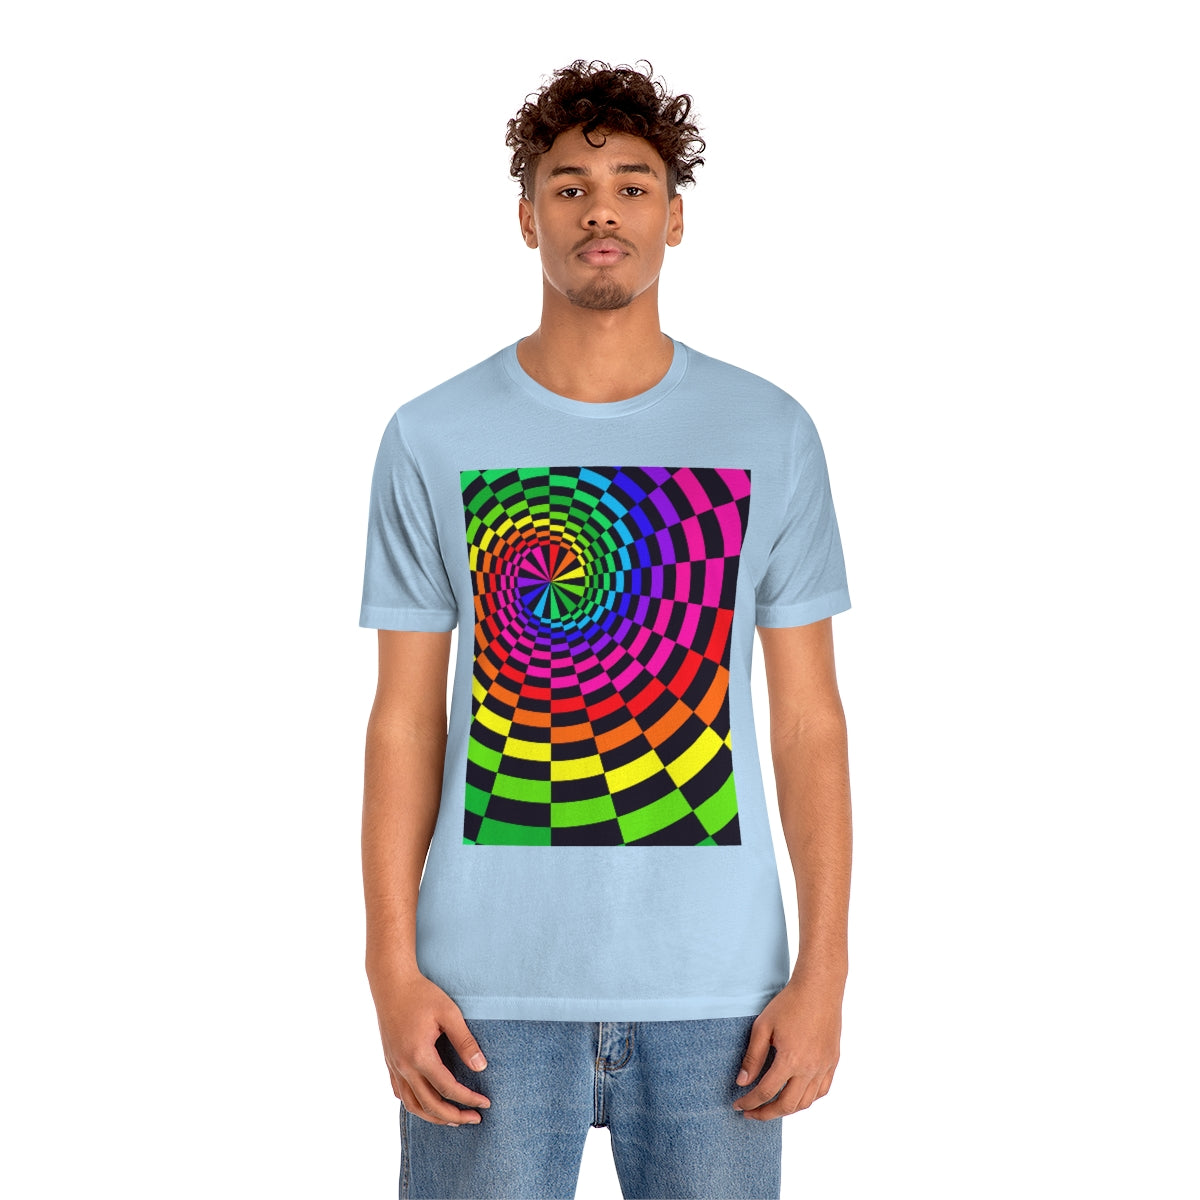 Unisex Jersey Short Sleeve Tee "Optical illusion Black Spirals of the Rectangles"